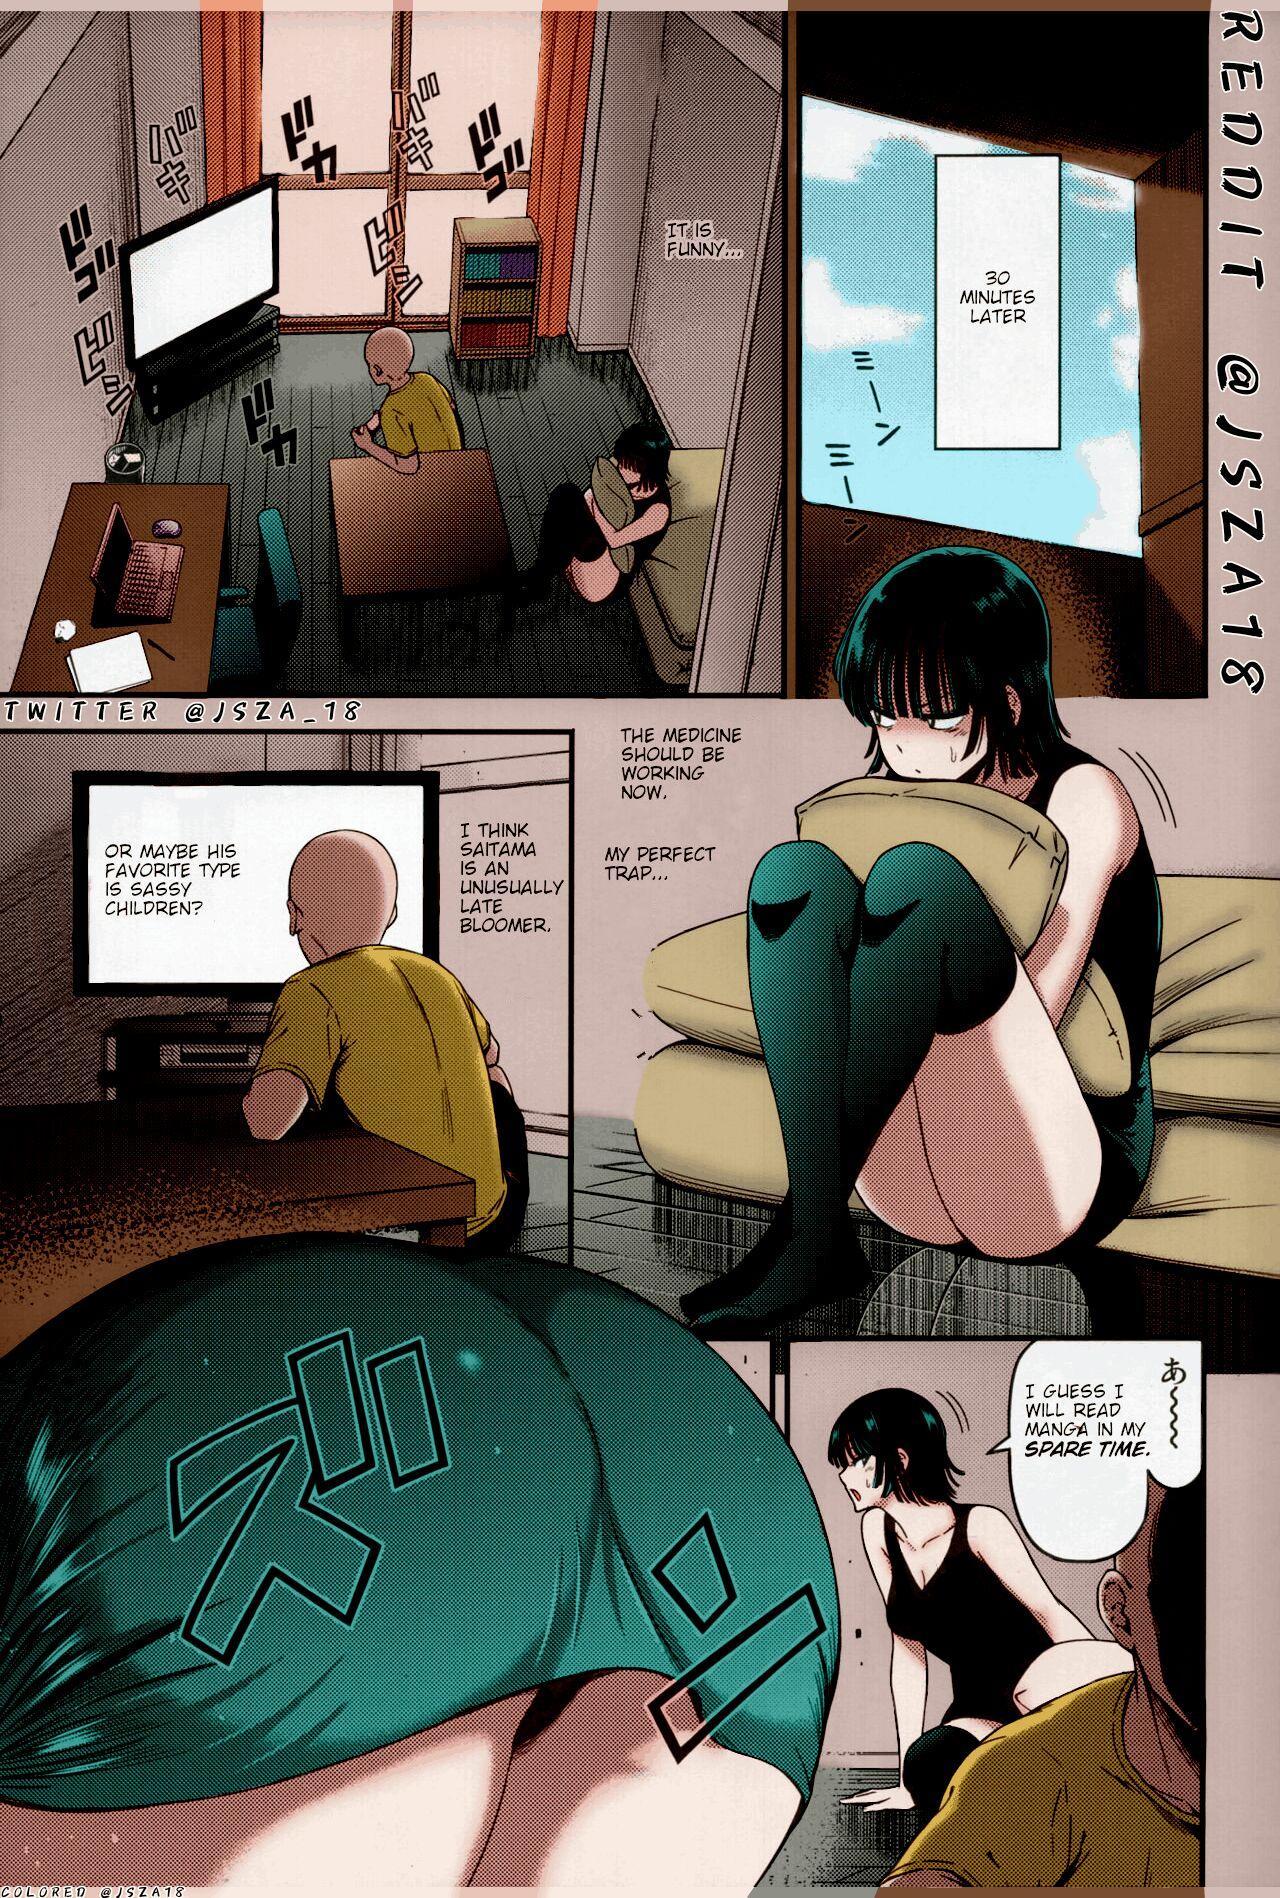 Gorgeous ONE-HURRICANE 6 - One punch man Sensual - Page 6